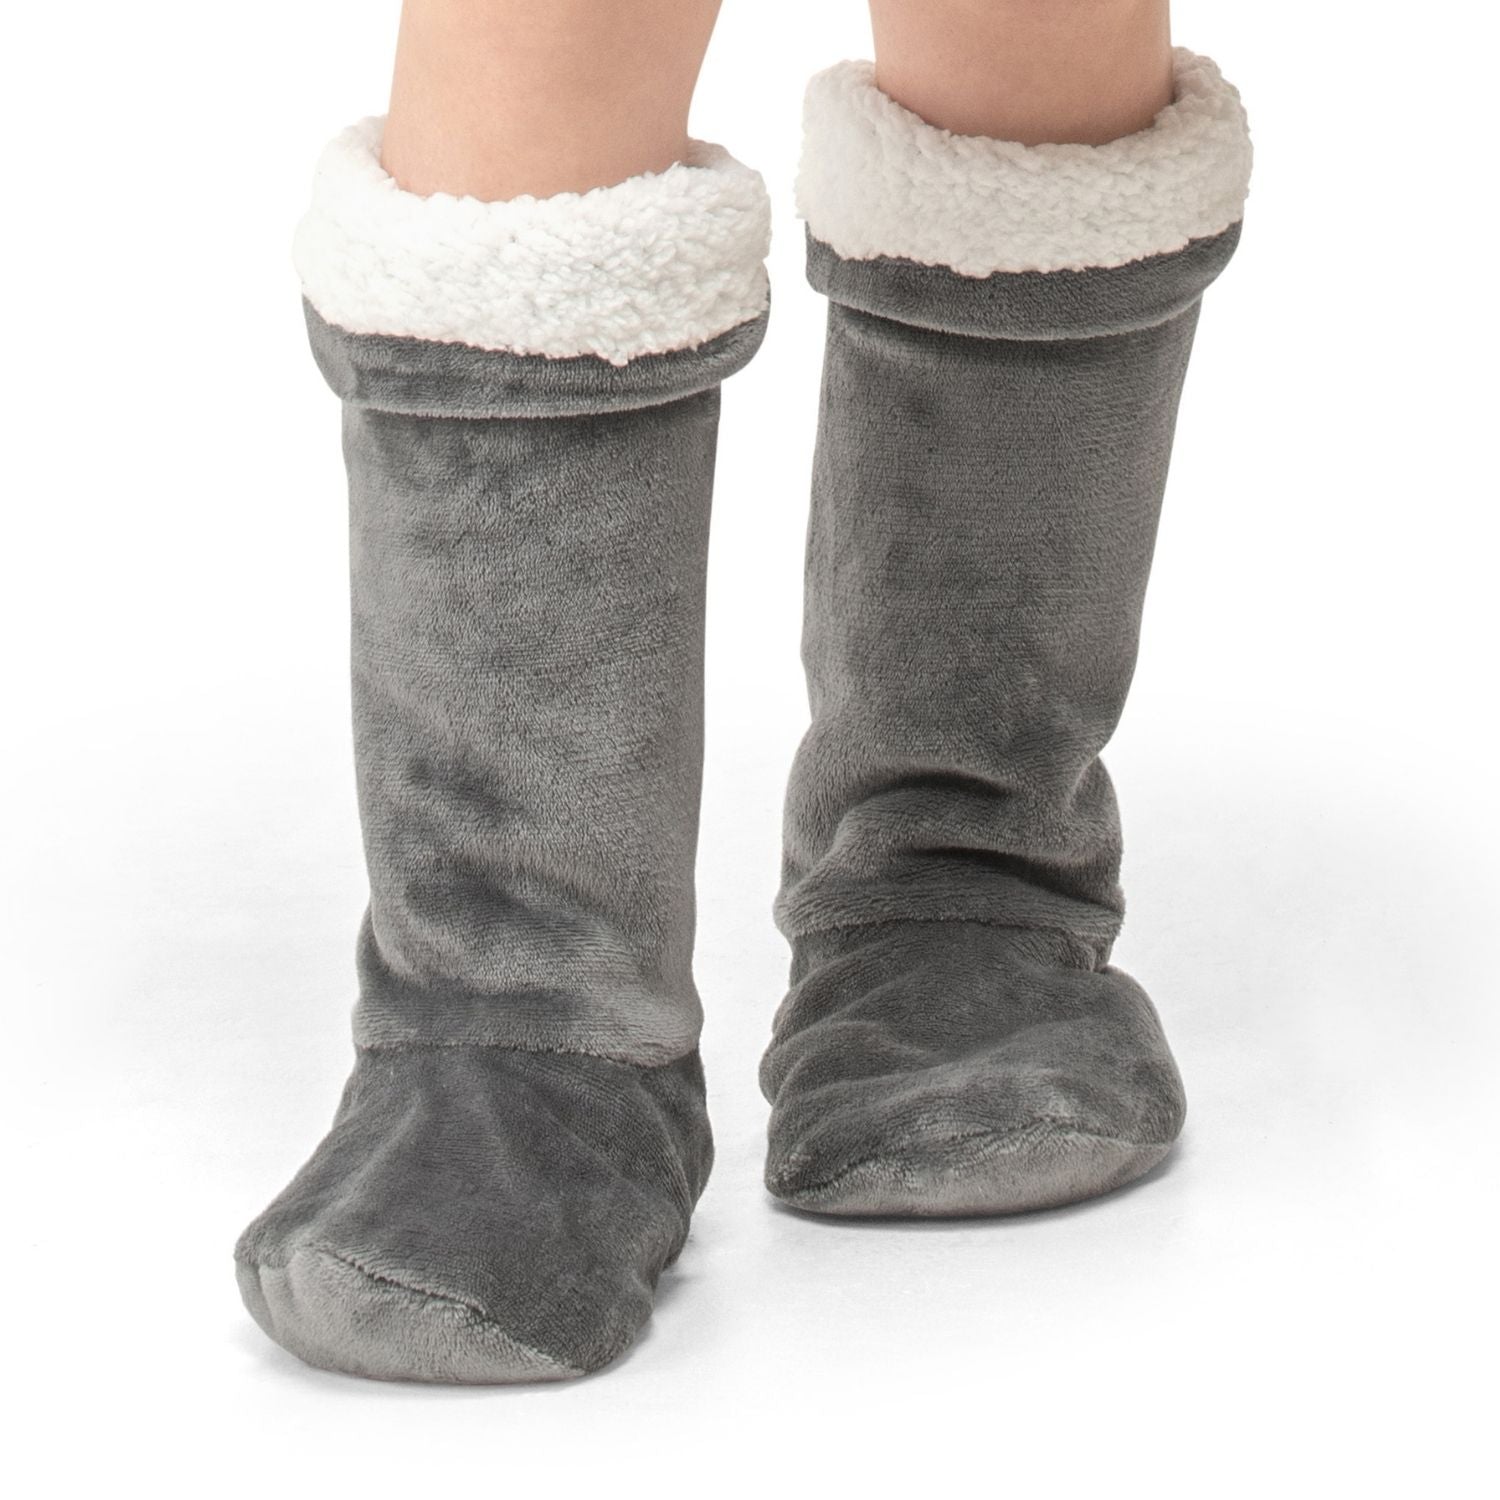 The Home Bedroom Cosy Socks - Grey 1 Shaws Department Stores